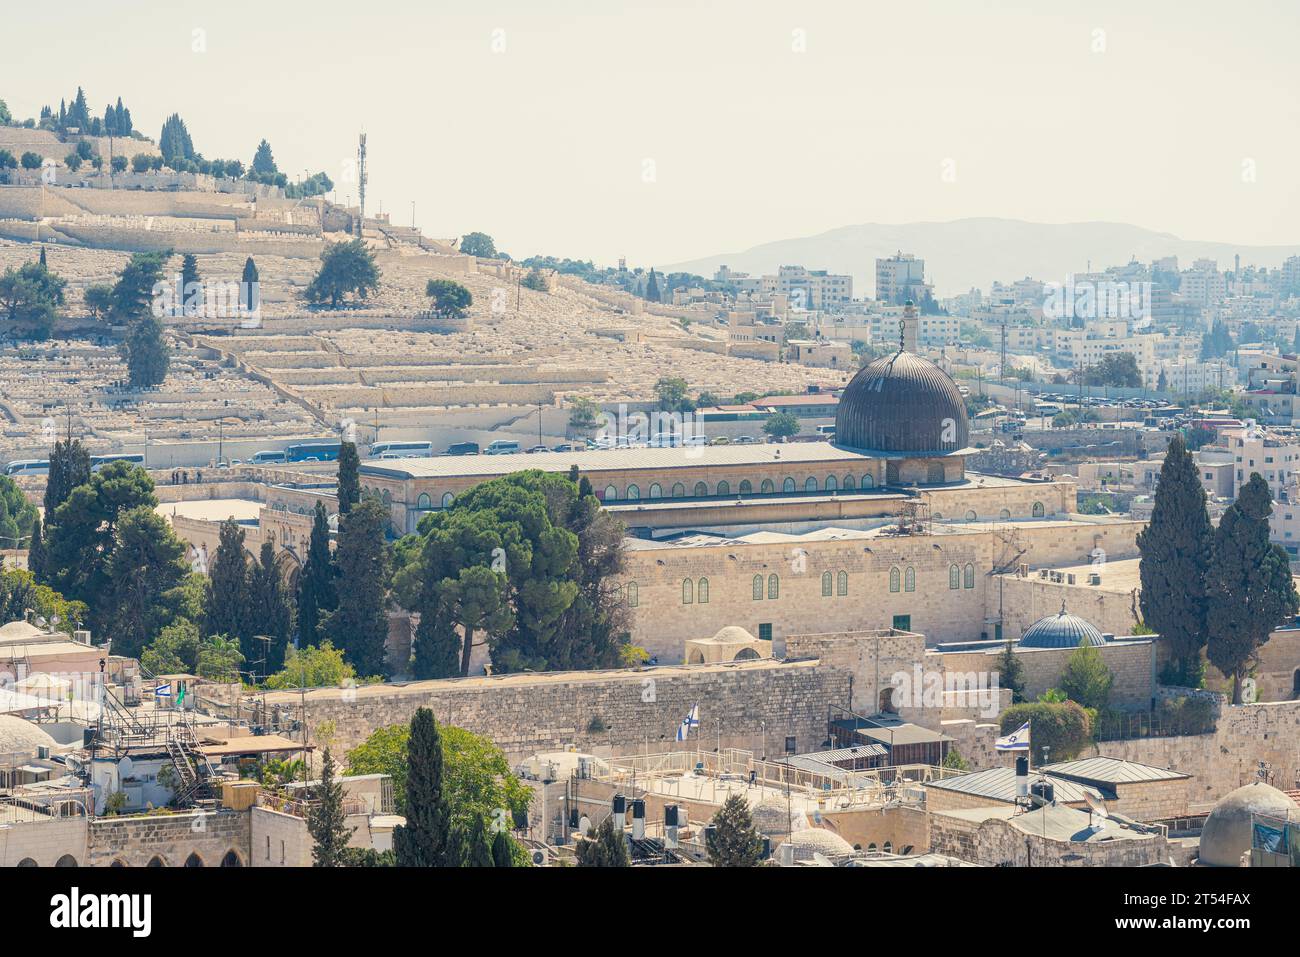 View of the Al-Aqsa Mosque in al-Haram al -Sharif for muslims or the Temple Mount for Jewish, Old City of Jerusalem cityscape Stock Photo